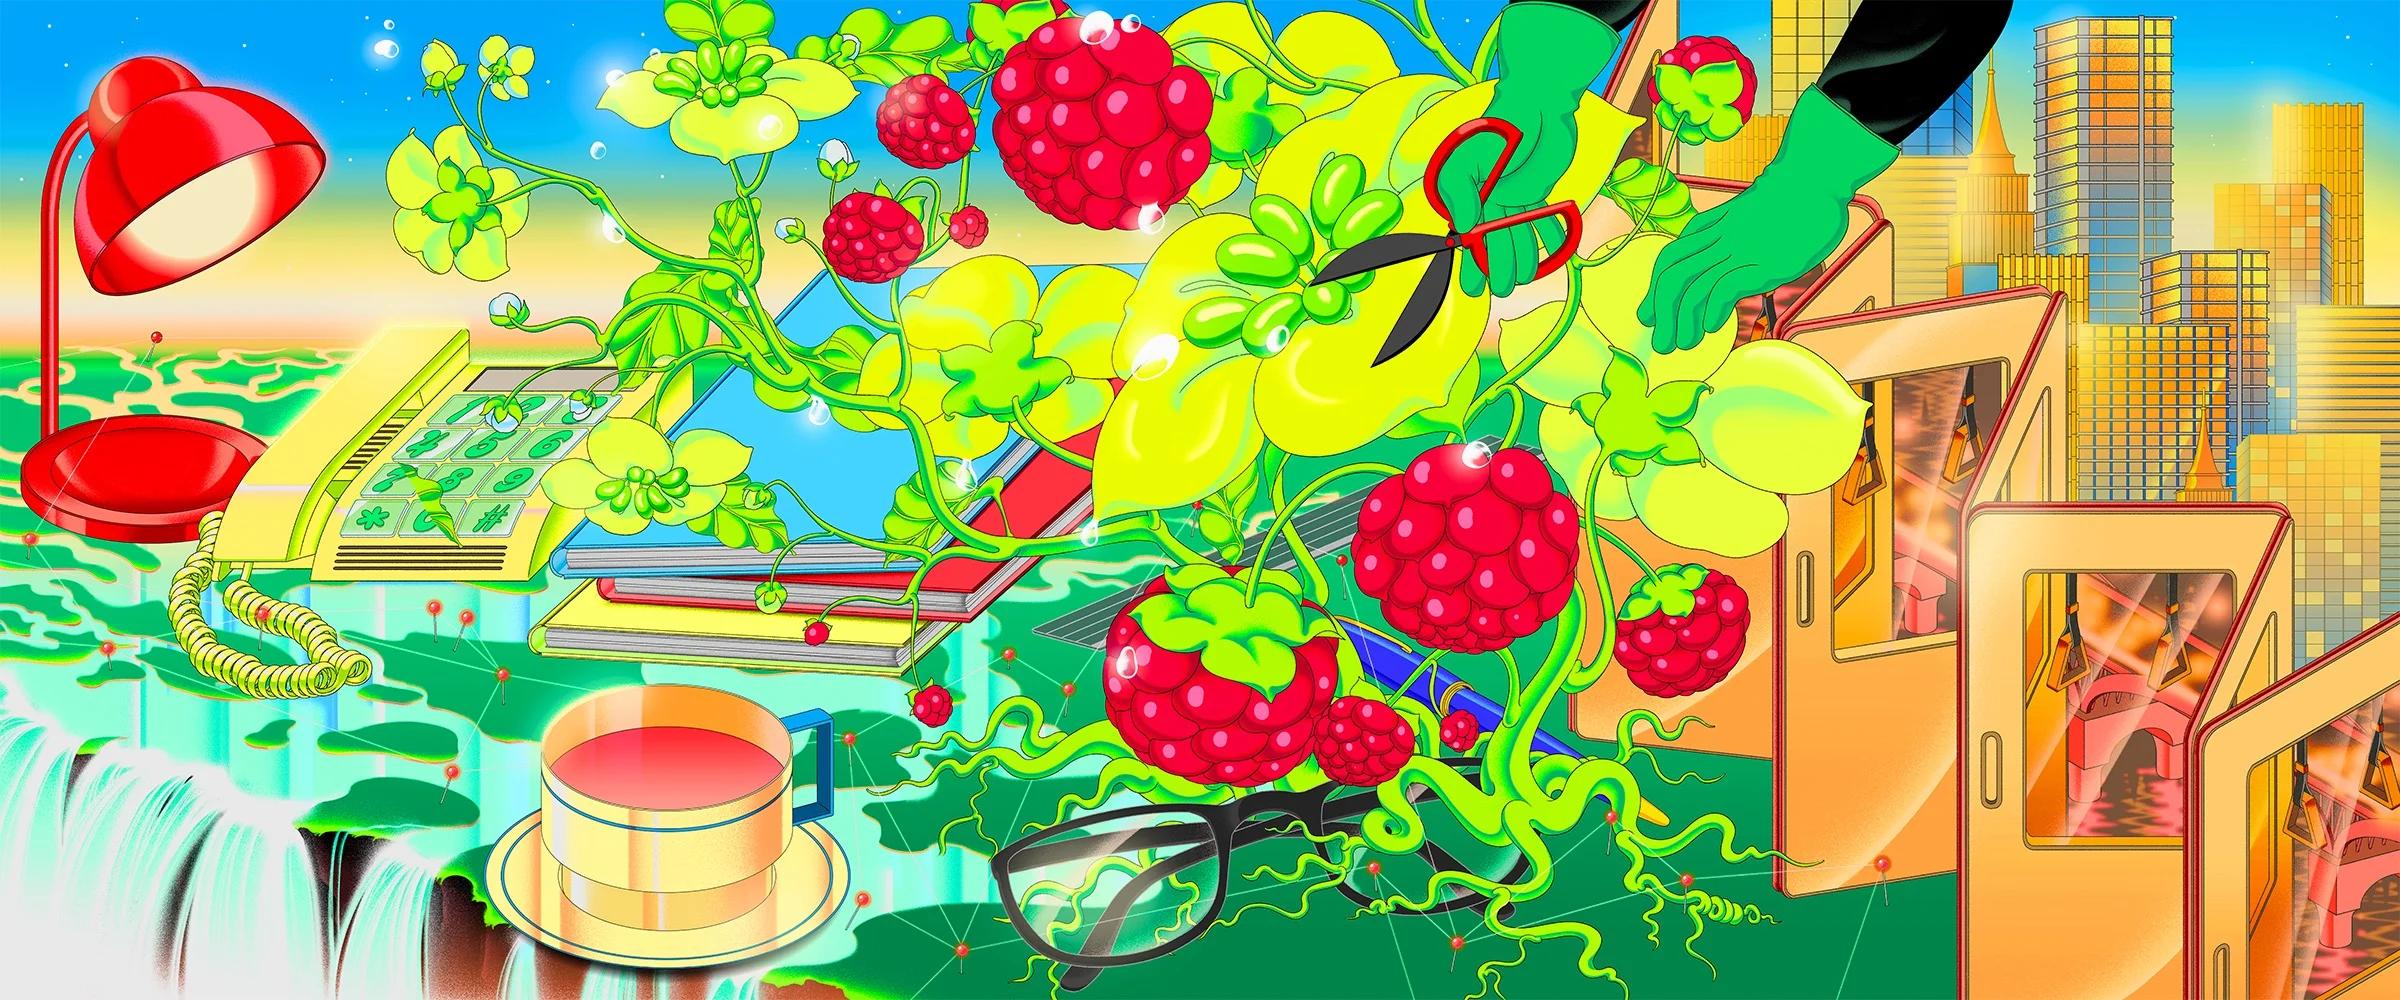 A digital illustration of a raspberry plant being trimmed with scissors, beneath its roots lie objects of an office like a lamp, '90s landline telephone, books, glasses, cup of coffee. A city skyline and subway doors on the right.